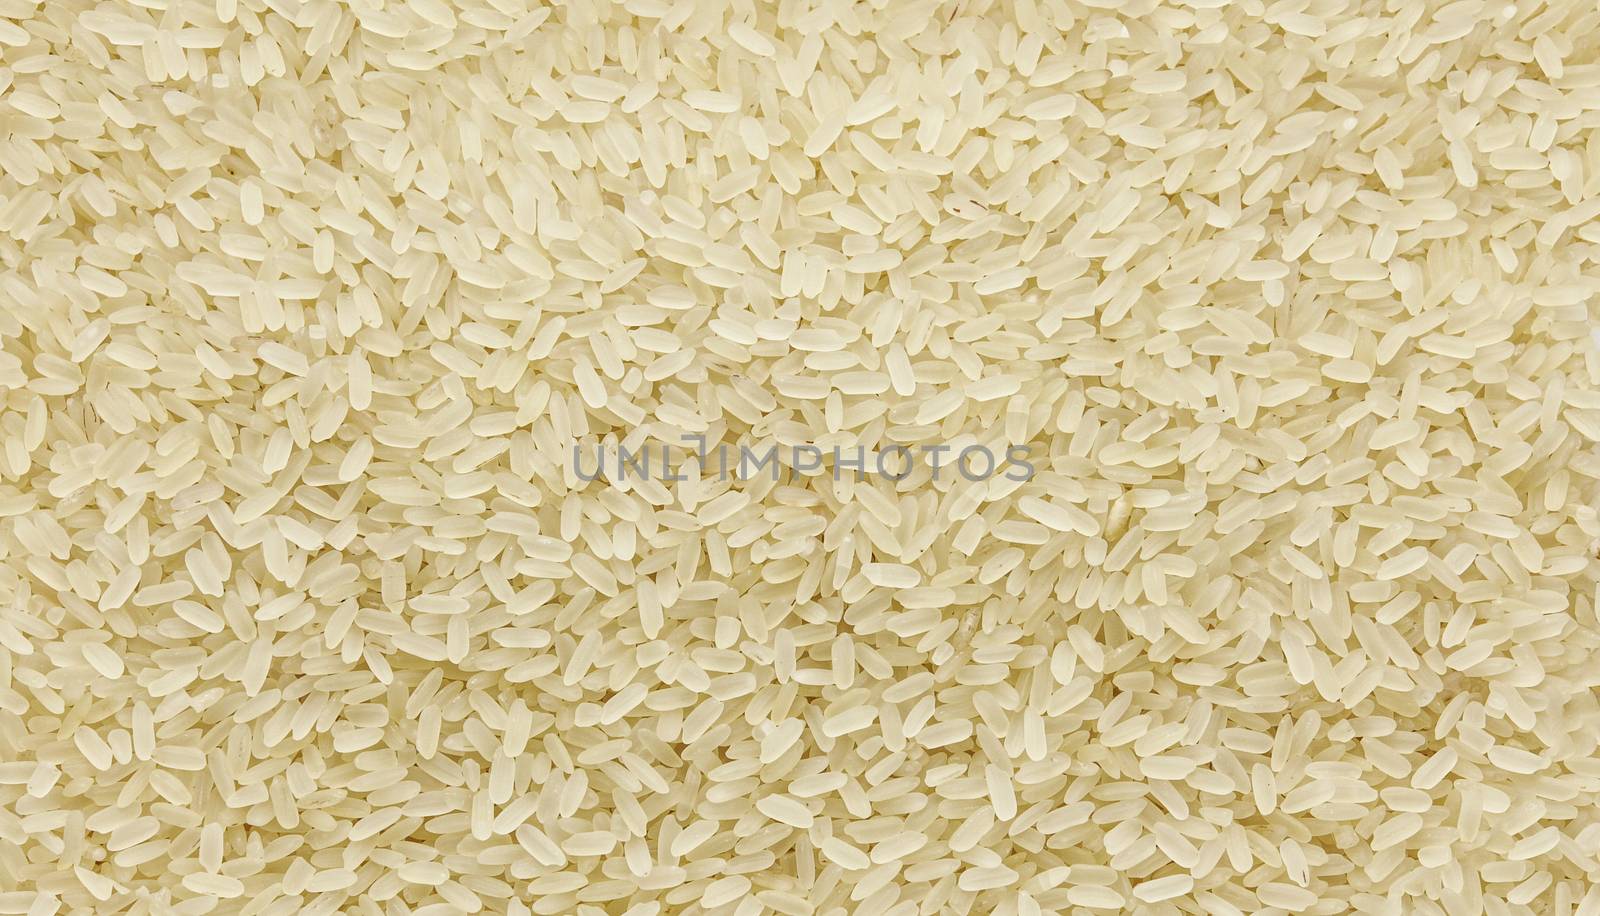 Steamed long grain rice - texture and details - traditional food, closeup